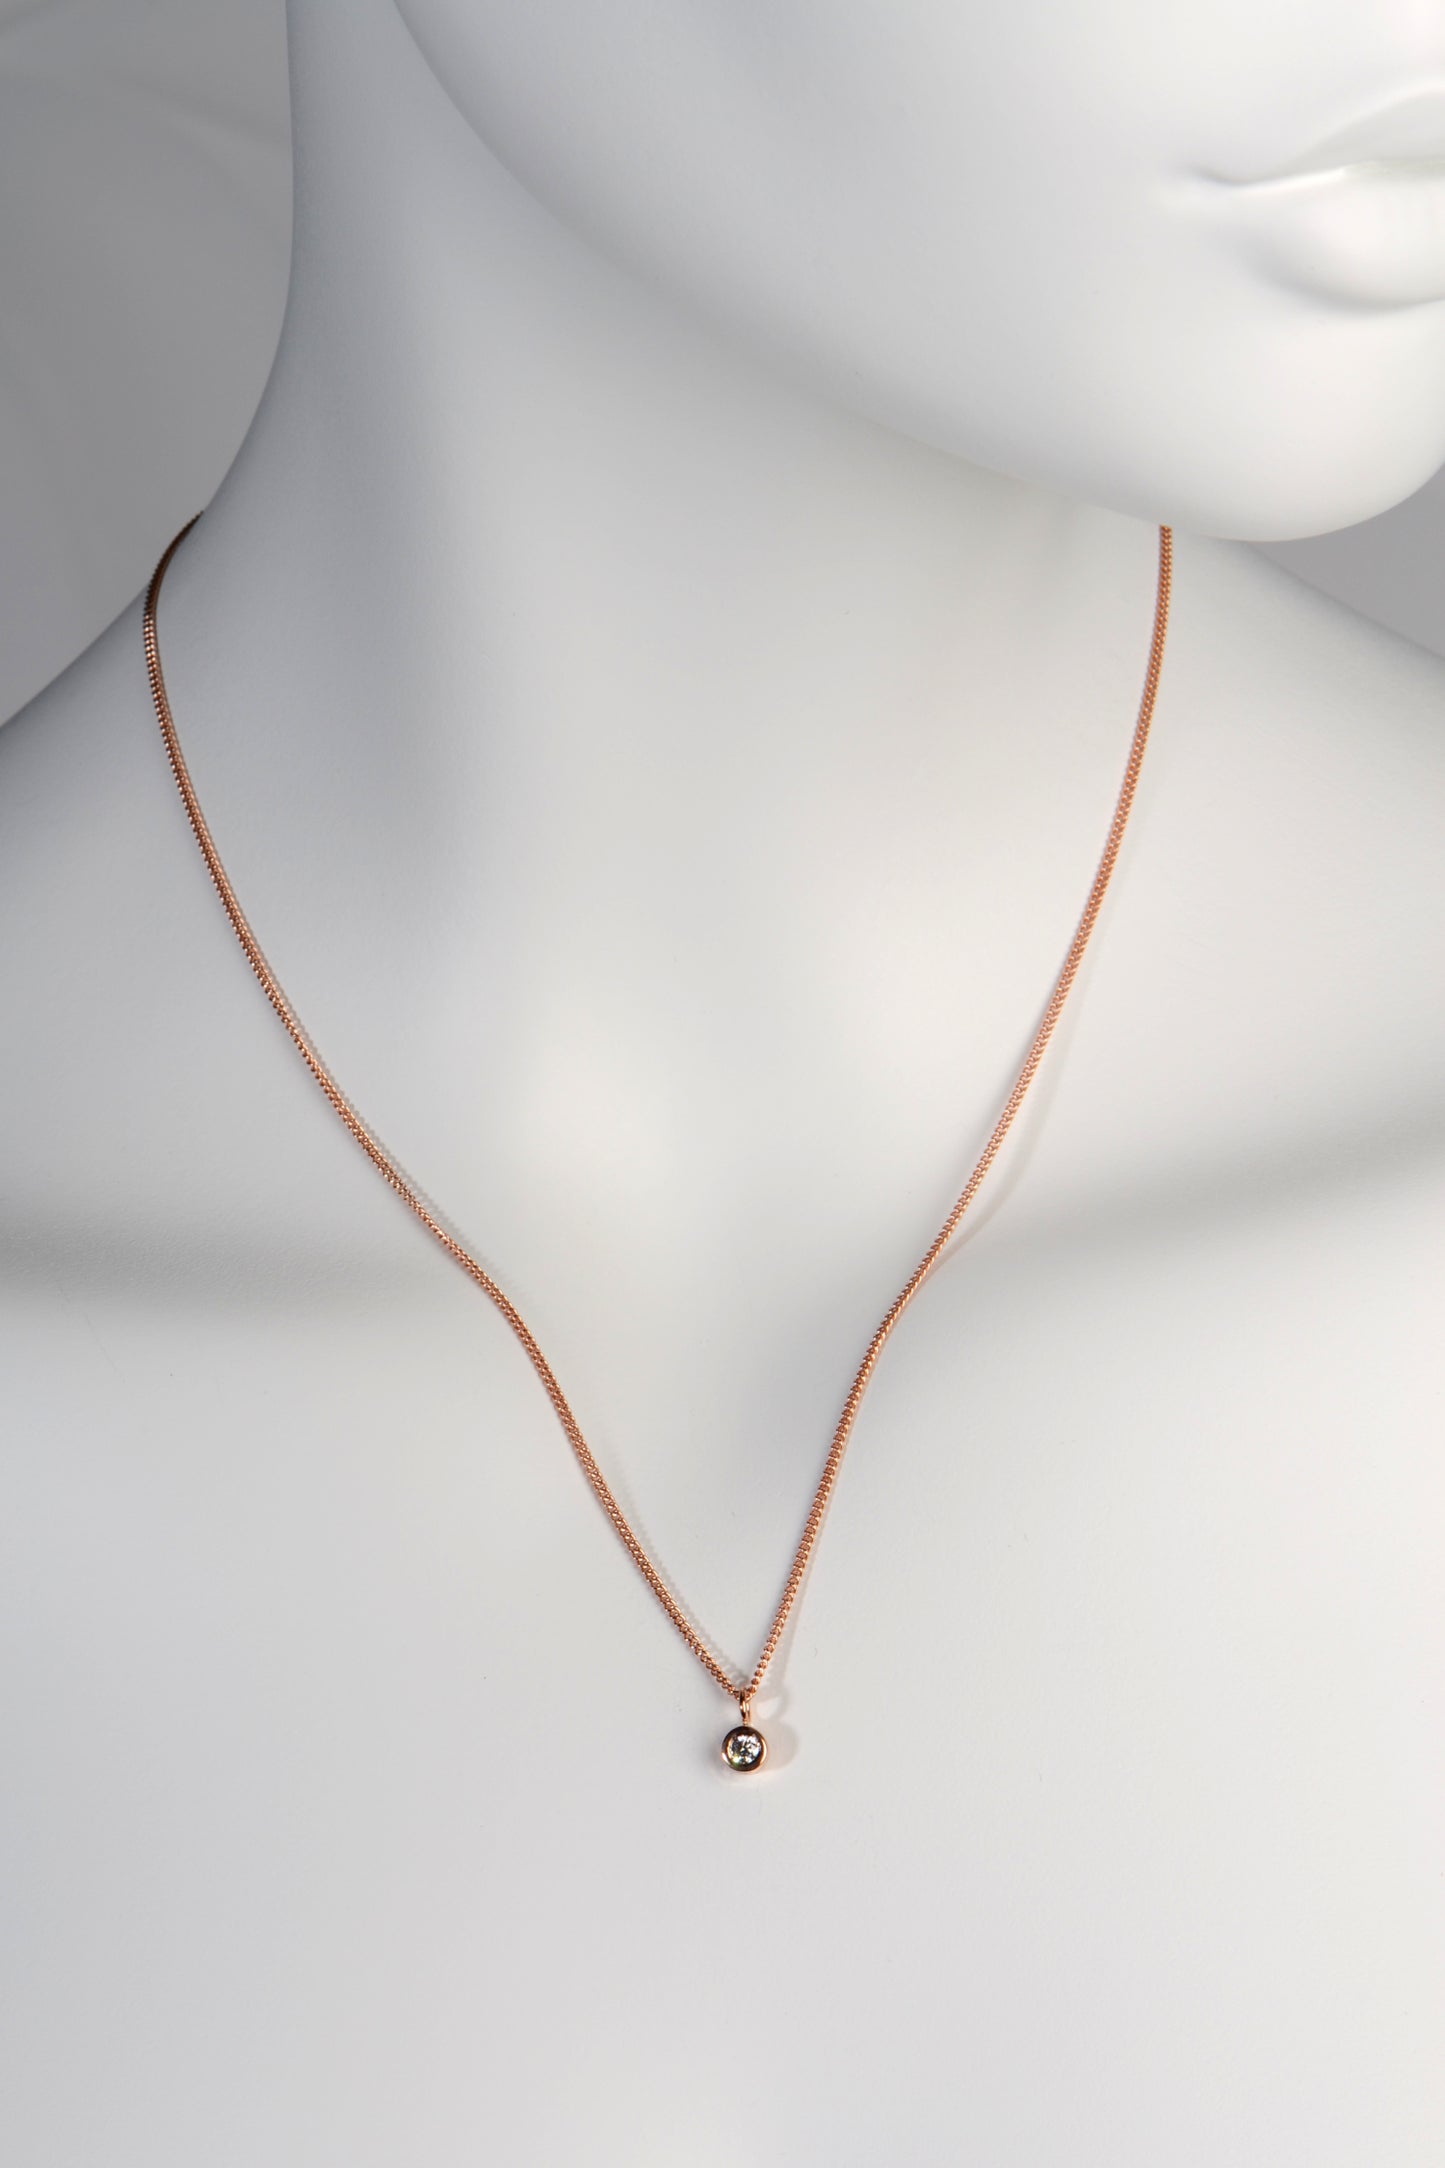 Petite diamond necklace made in 9ct rose gold. A small solid circle of rose gold 5mm in diameter hangs on a 45cm long rose gold curb chain. The diamond is 0.10ct G colour VS clarity. 